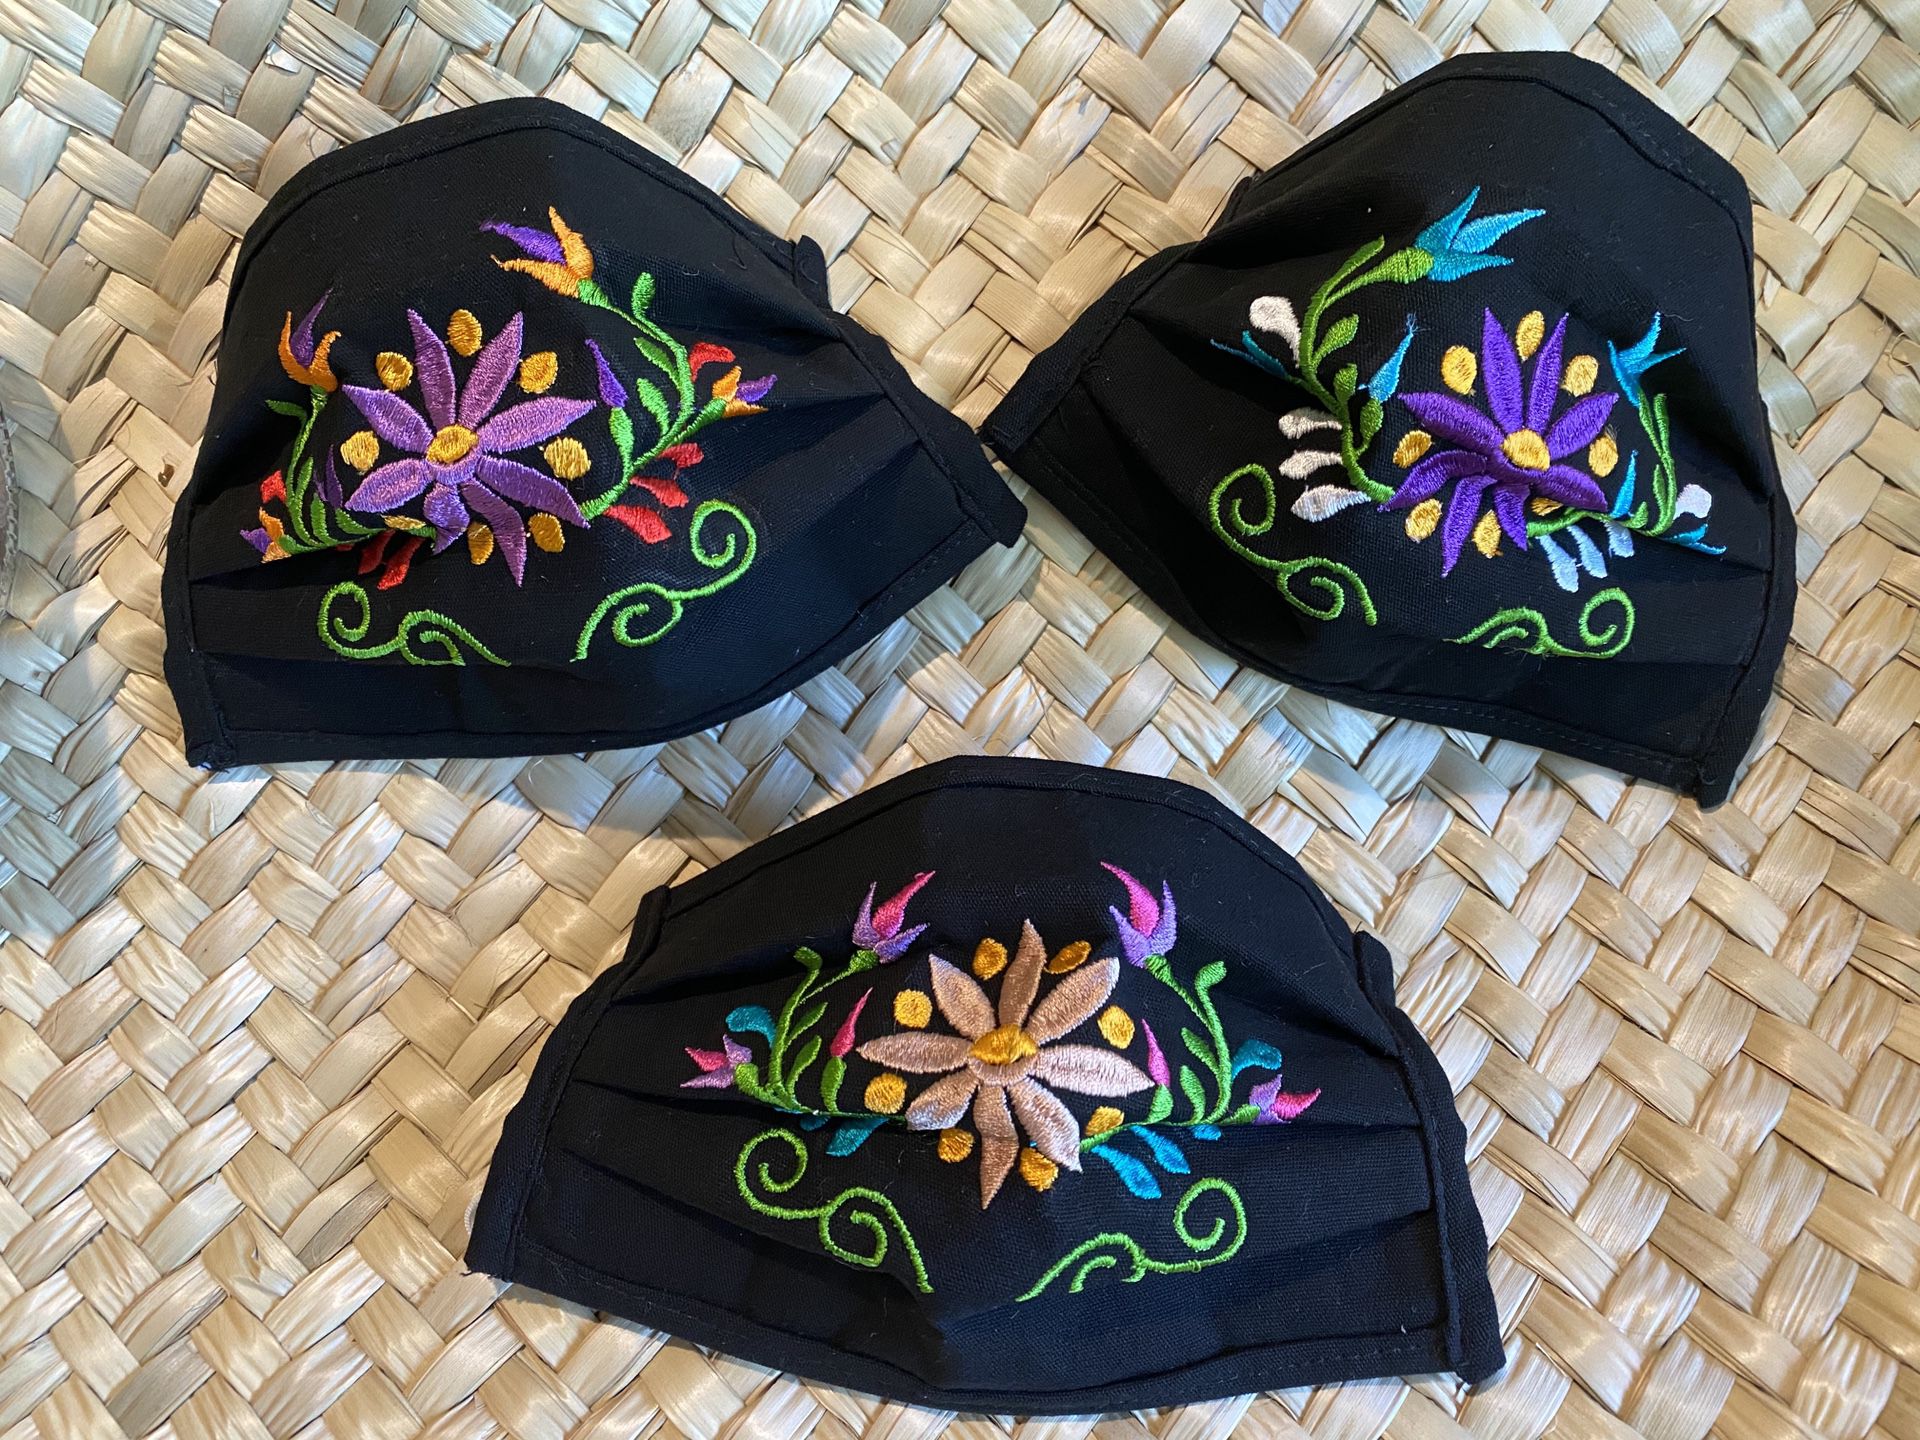 Embroidered Face Masks